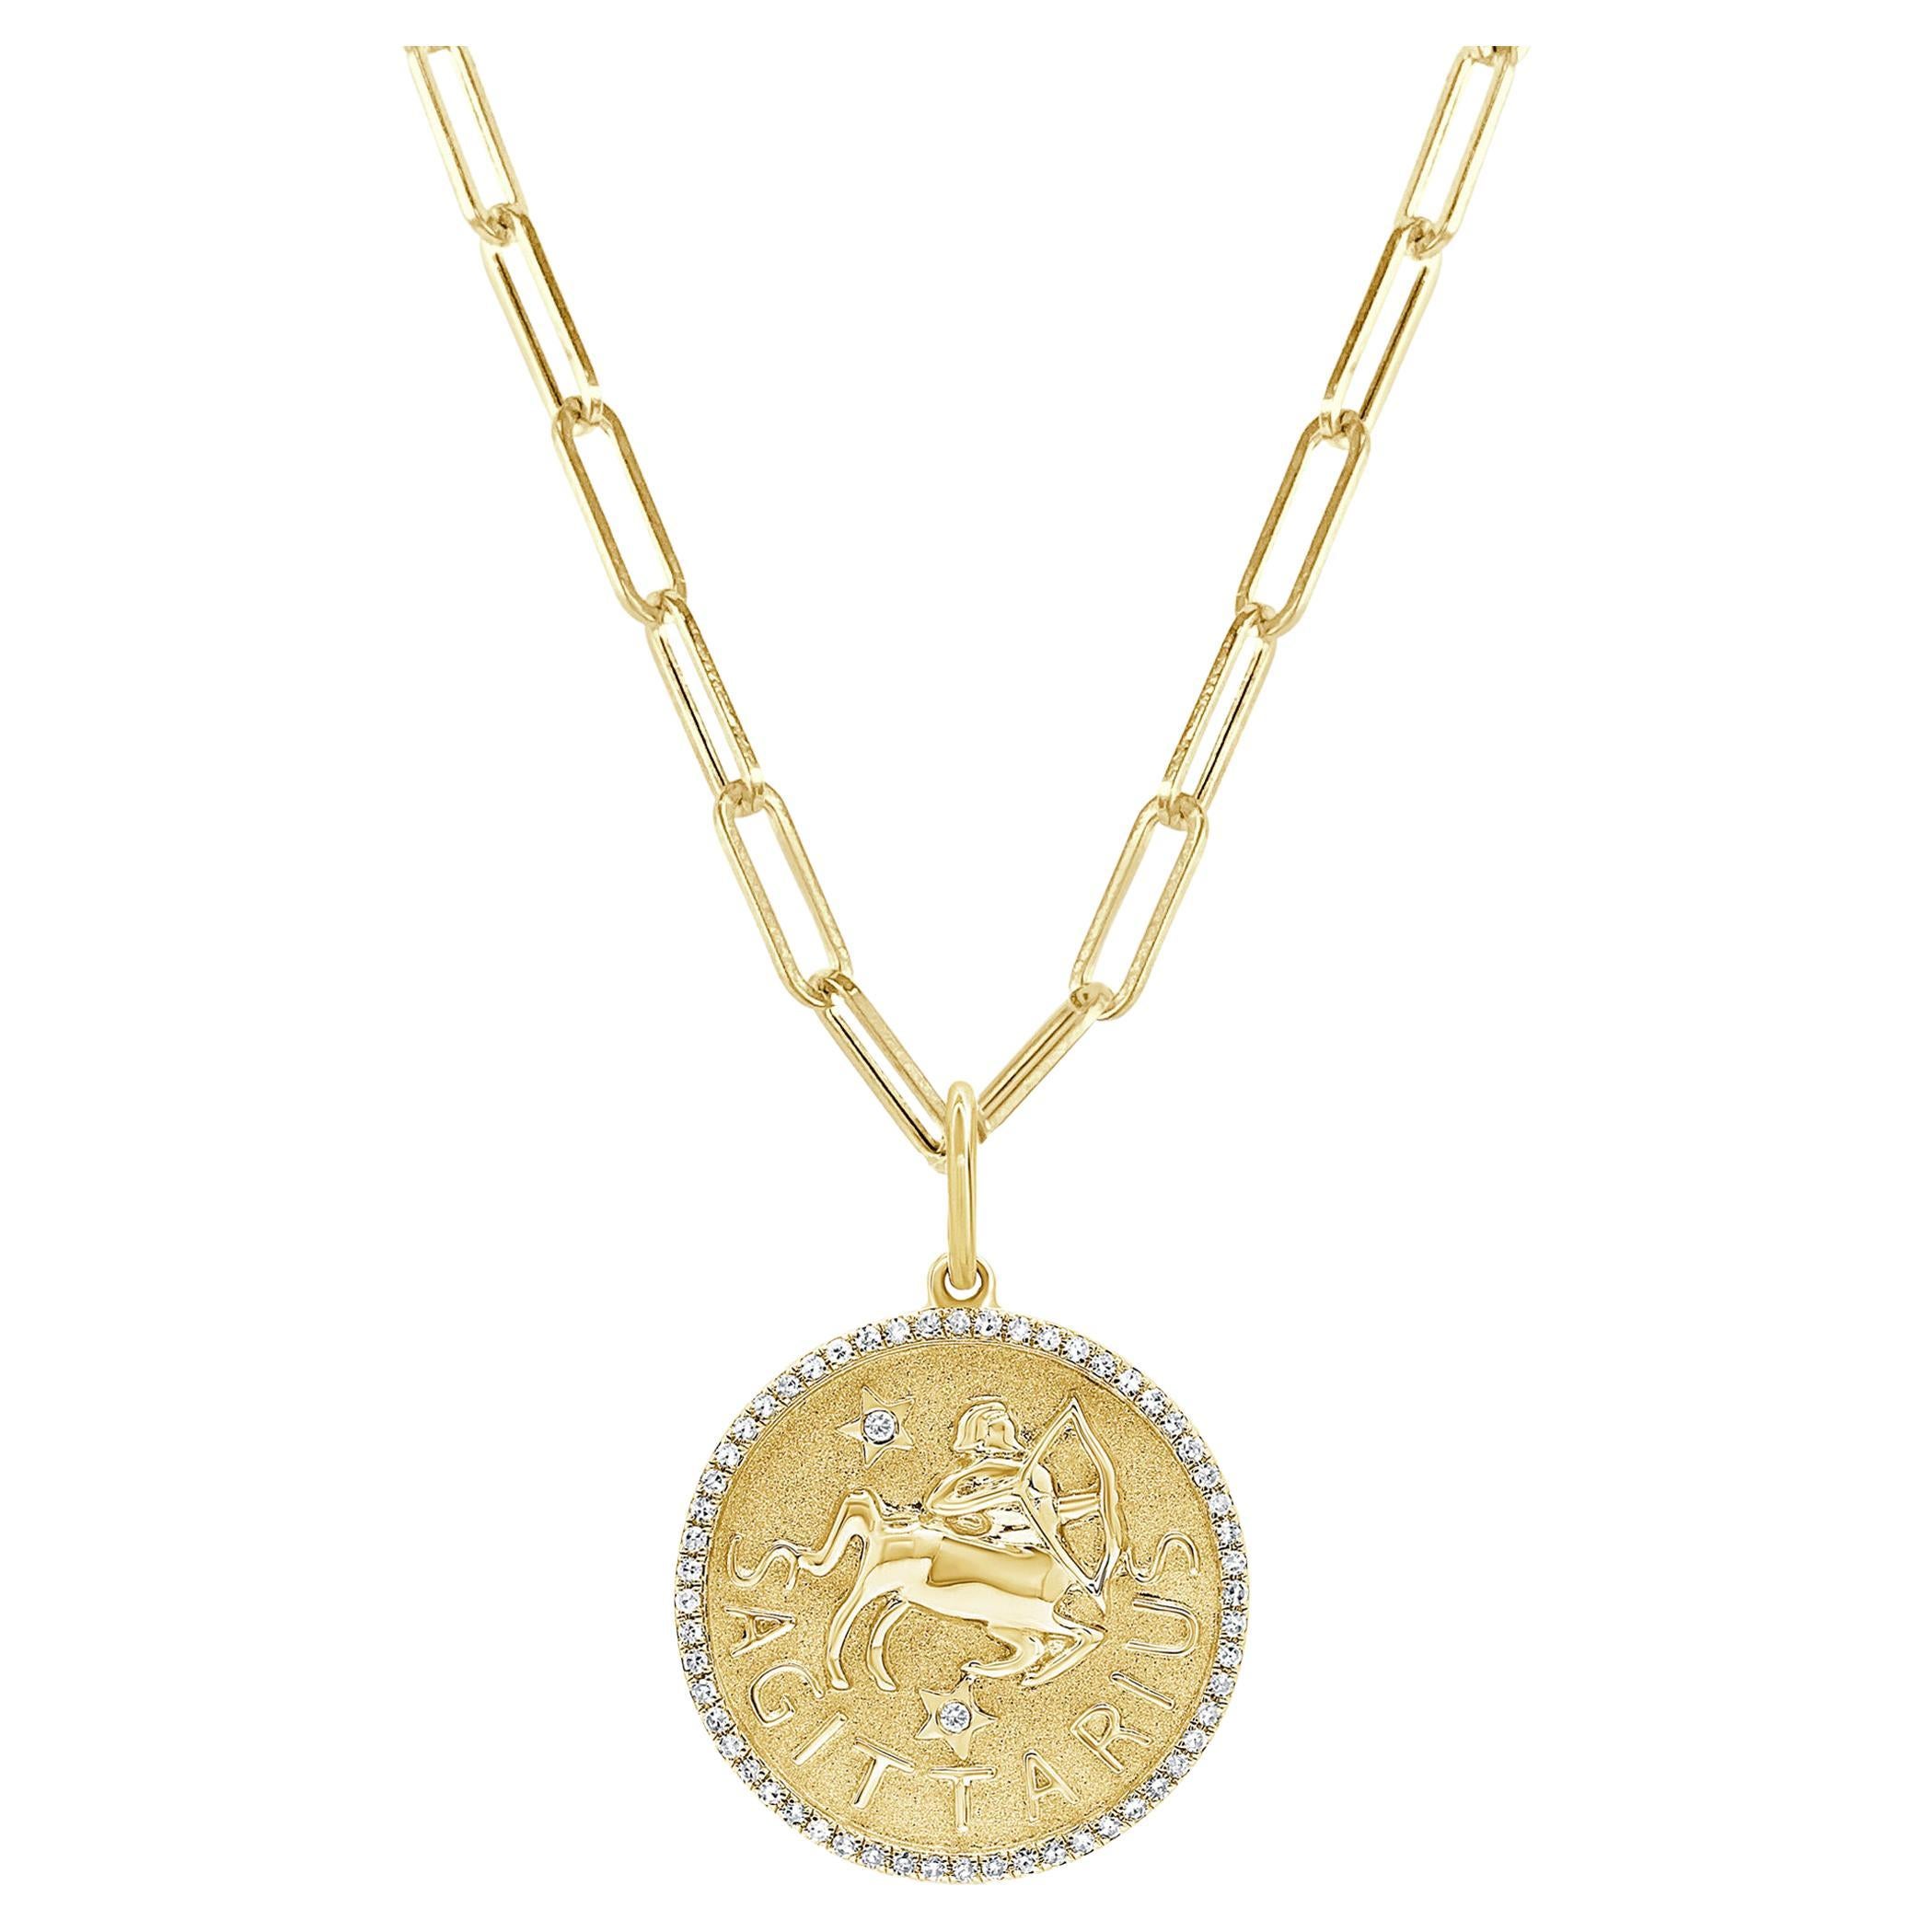 Zodiac Diamond Necklace 14k Yellow Gold 1/5 CT TDW Gifts for Her, Sagitarius